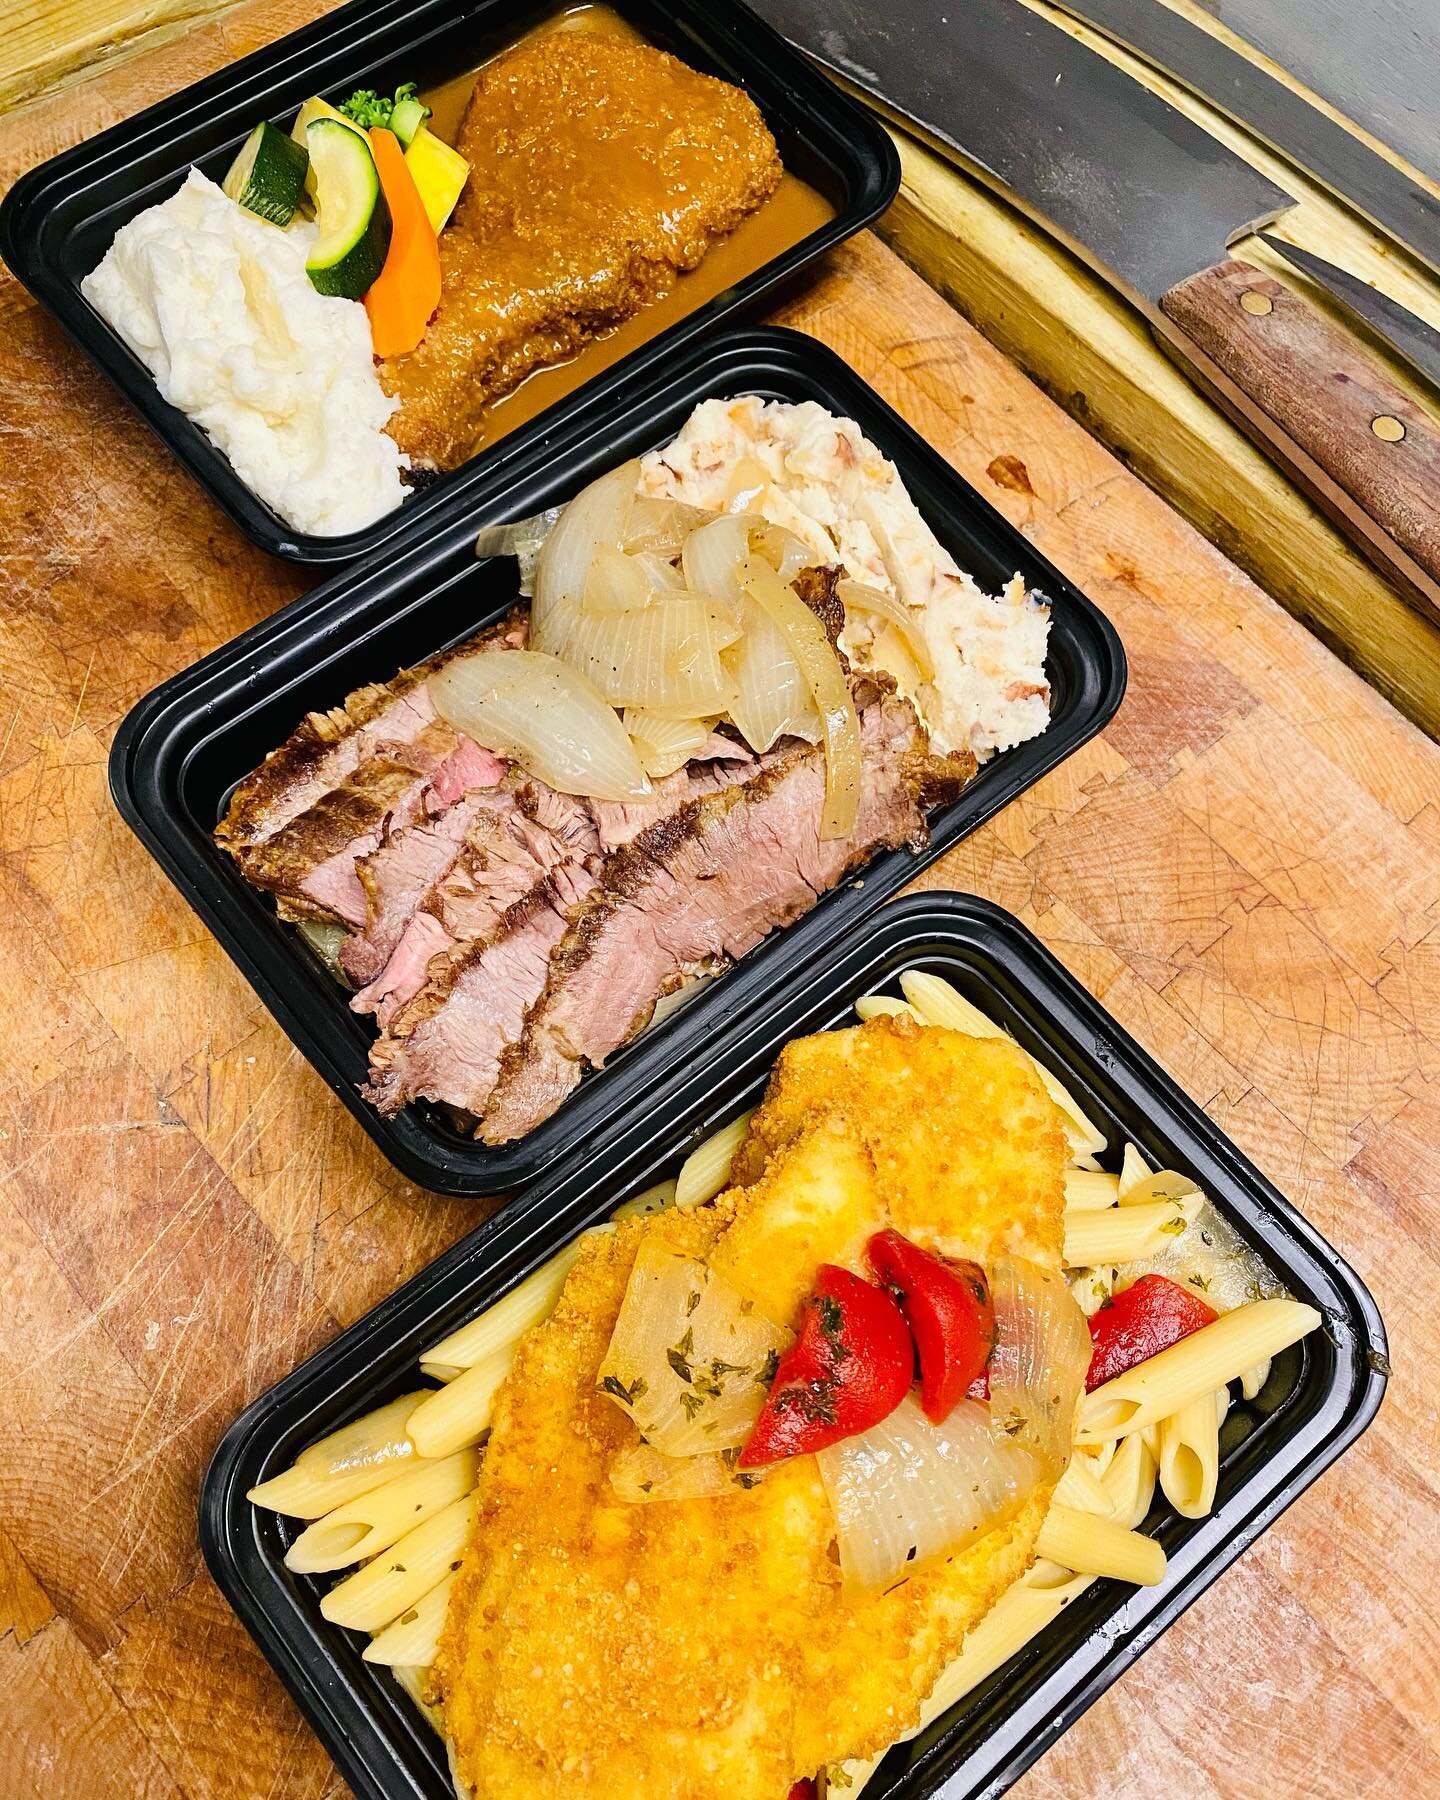 Monday&rsquo;s Line up, (Breaded Pork Chop with Mashed Potatoes and Steamed Veggies, Grilled Flank Steak Caramelized Onions Mash Potatoes and Parm Crusted Chicken with Penne Pasta )  come get them while they last. Make it your lunch special or save i